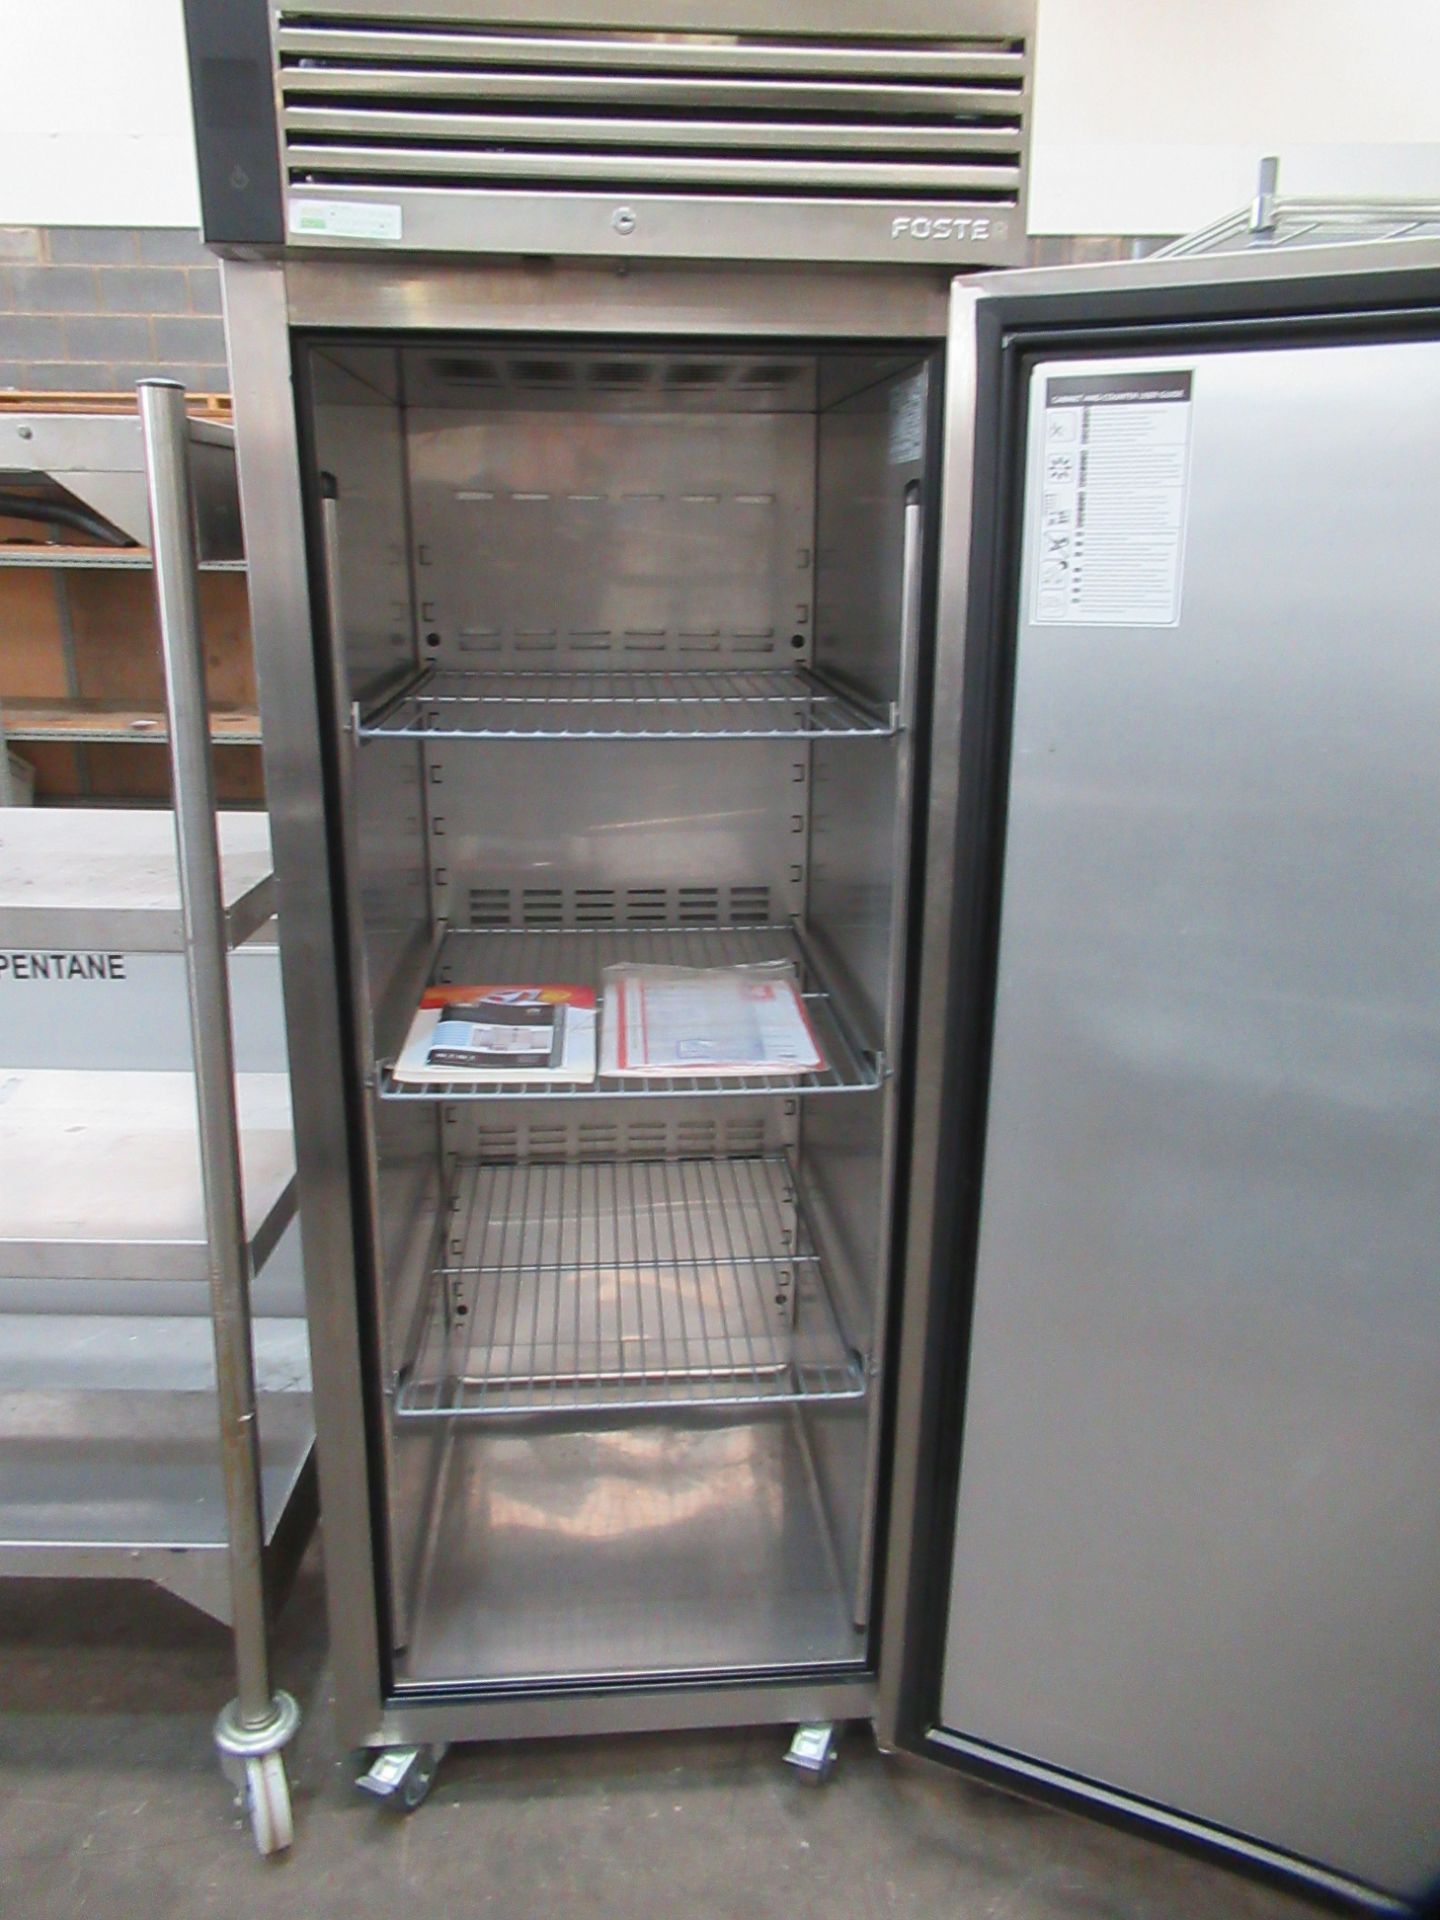 Foster Eco Pro G2 Upright Mobile Refrigerator, model EP700H - Image 4 of 5